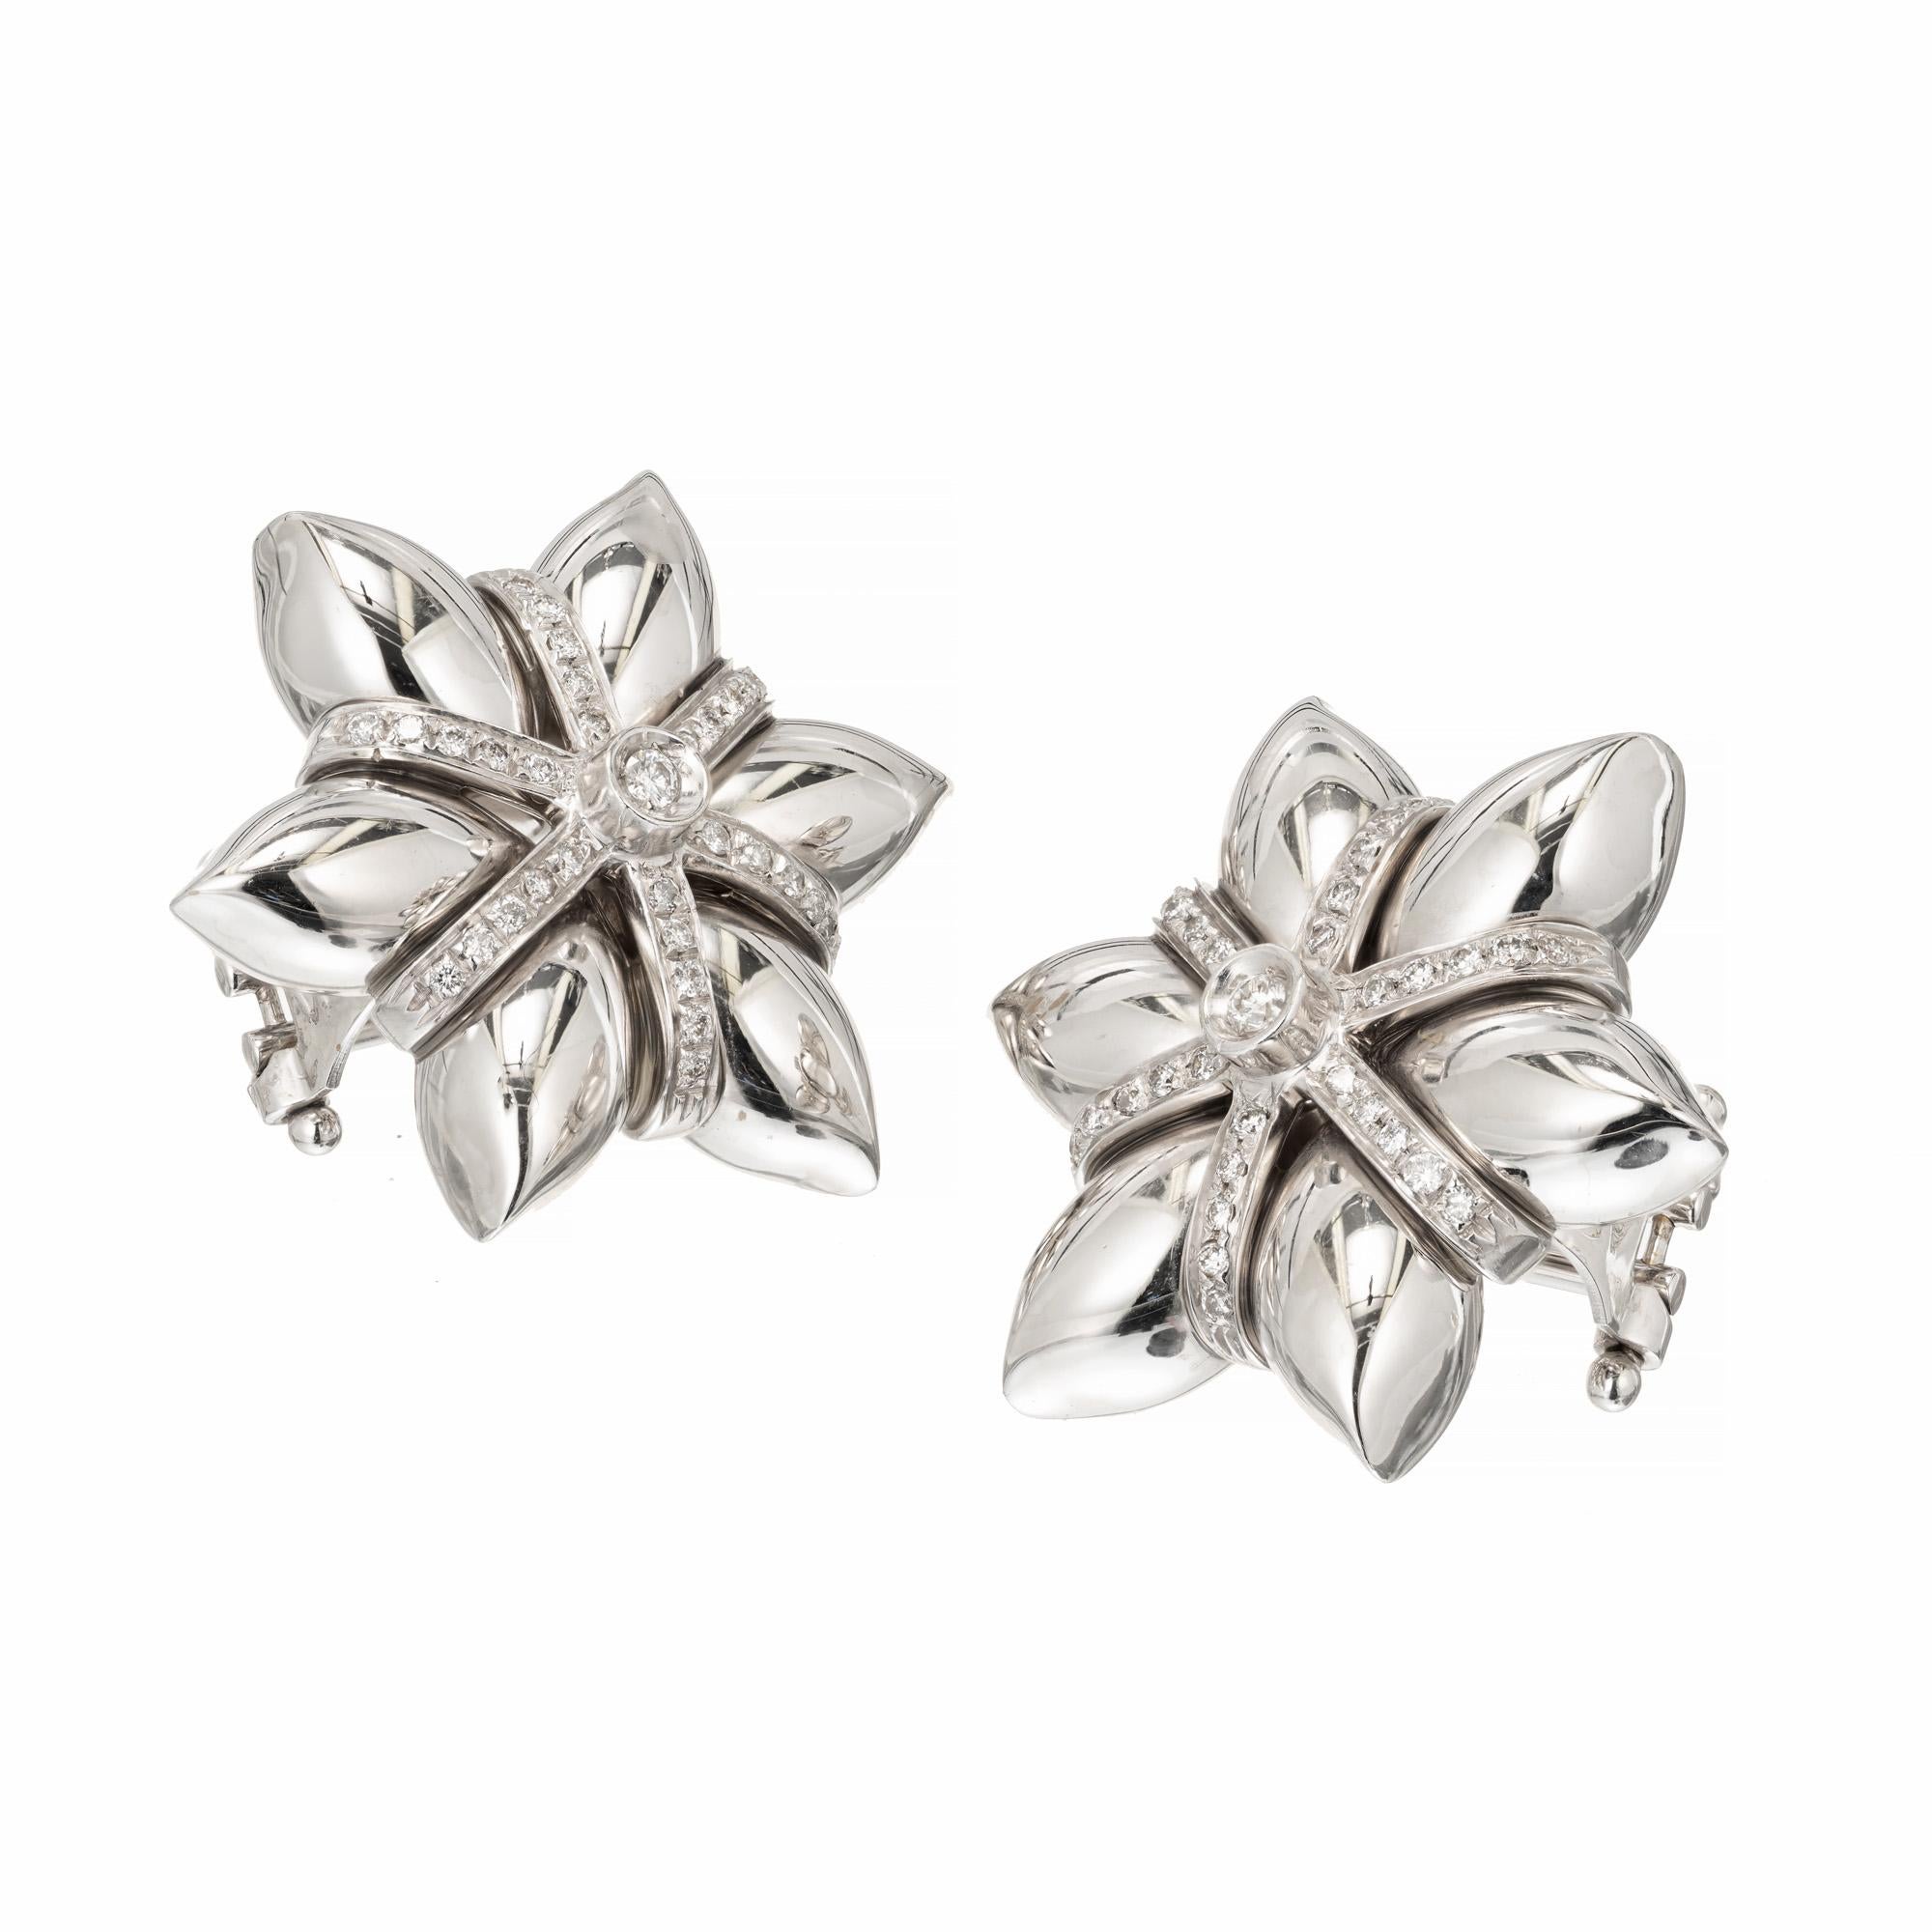 3 dimensional diamond 18k white gold star shaped earrings. Full cut Diamond bead set stripes. Lever backs. 

62 round diamonds approx. total weight .36cts
18k White Gold
Stamped 750 18k
13.4 grams
7 x 1 inch